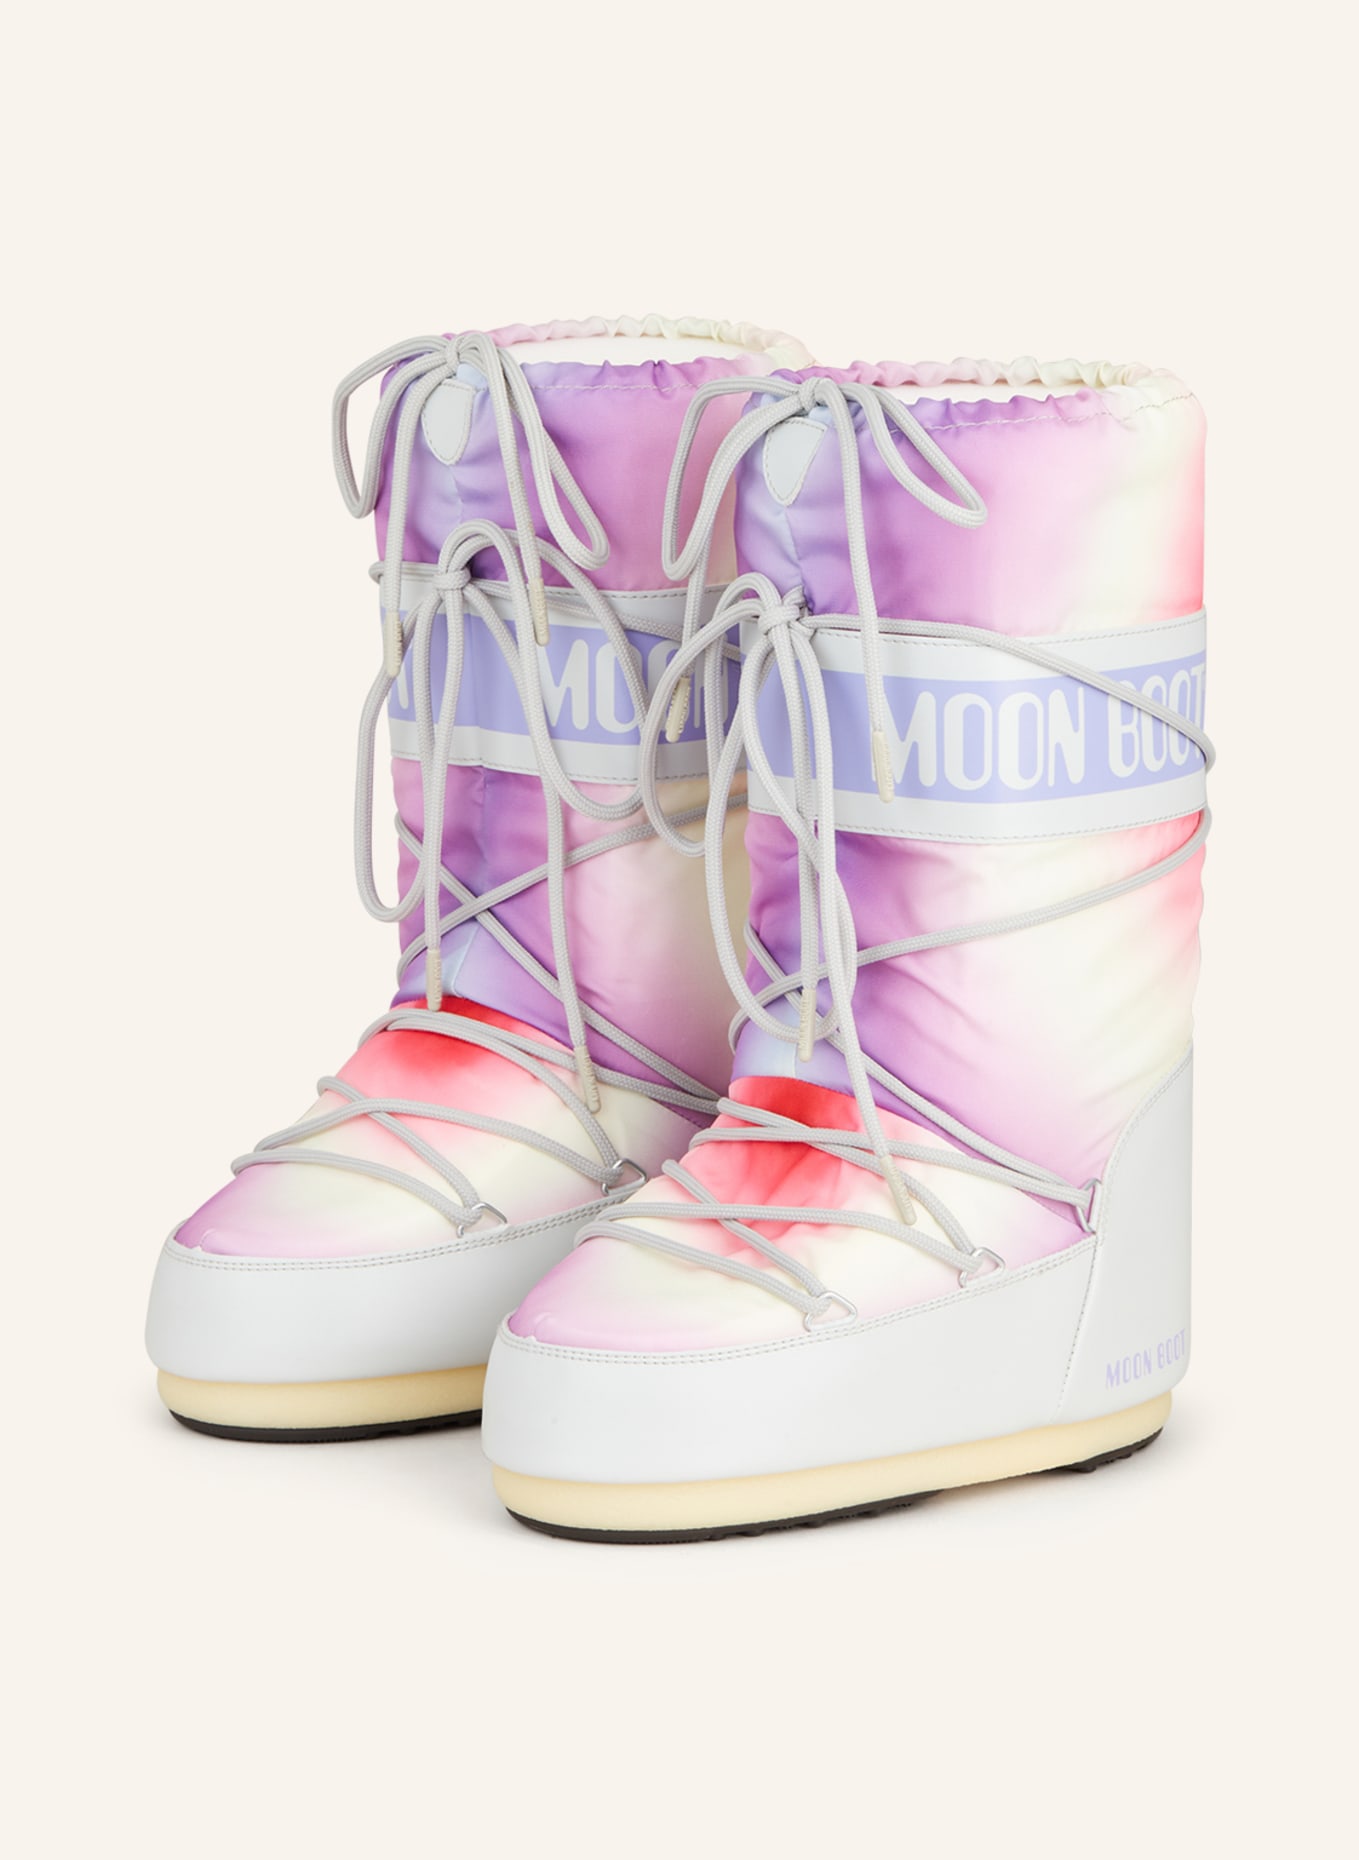 MOON BOOT Moon boots ICON TIE DYE, Color: PURPLE/ PINK (Image 1)